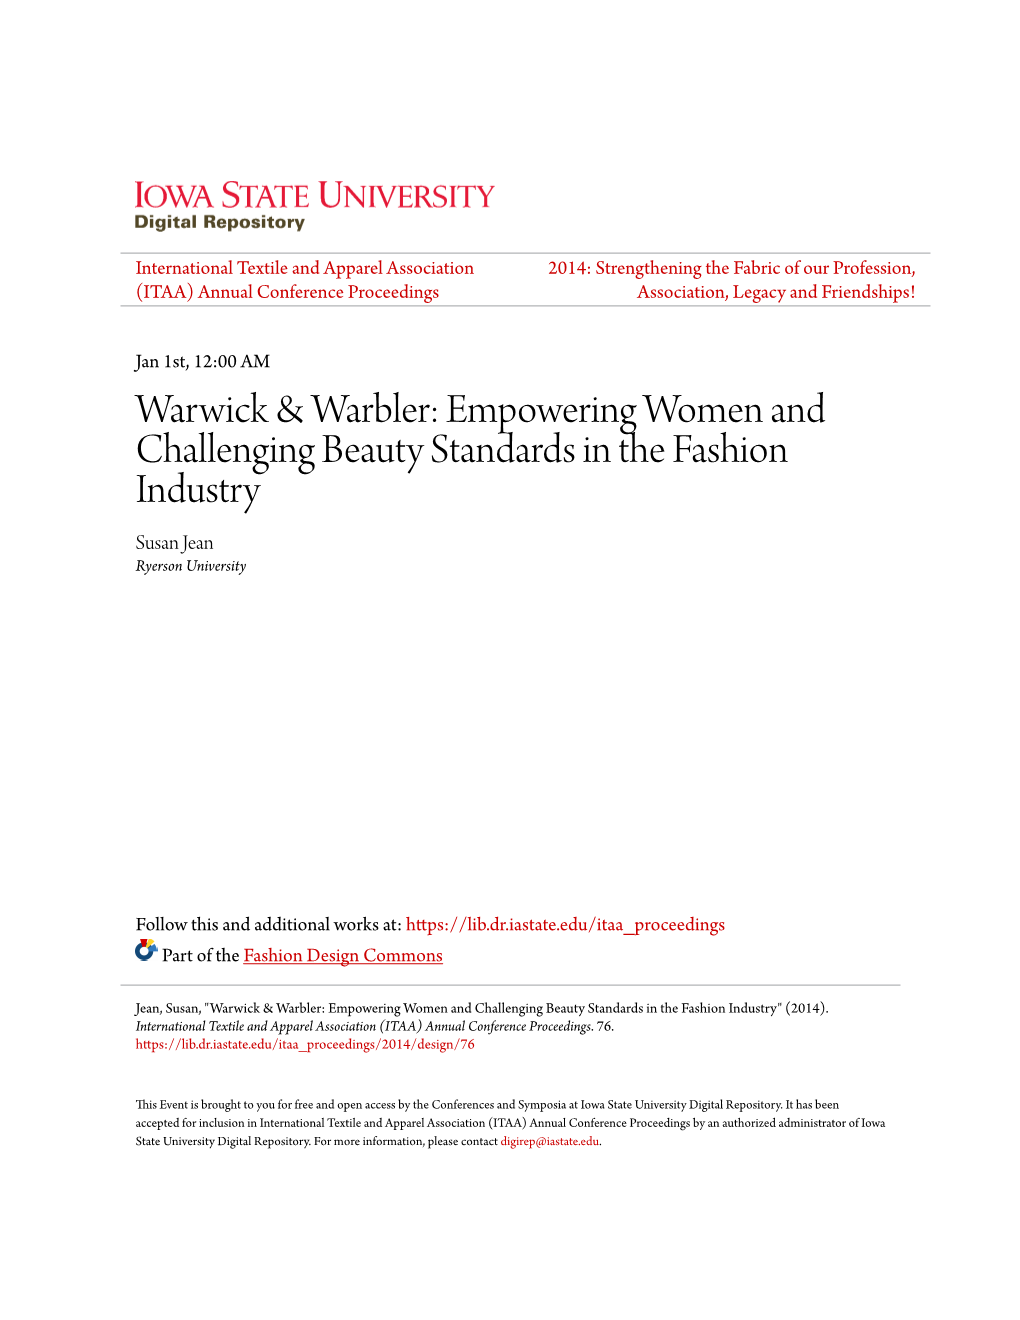 Empowering Women and Challenging Beauty Standards in the Fashion Industry Susan Jean Ryerson University